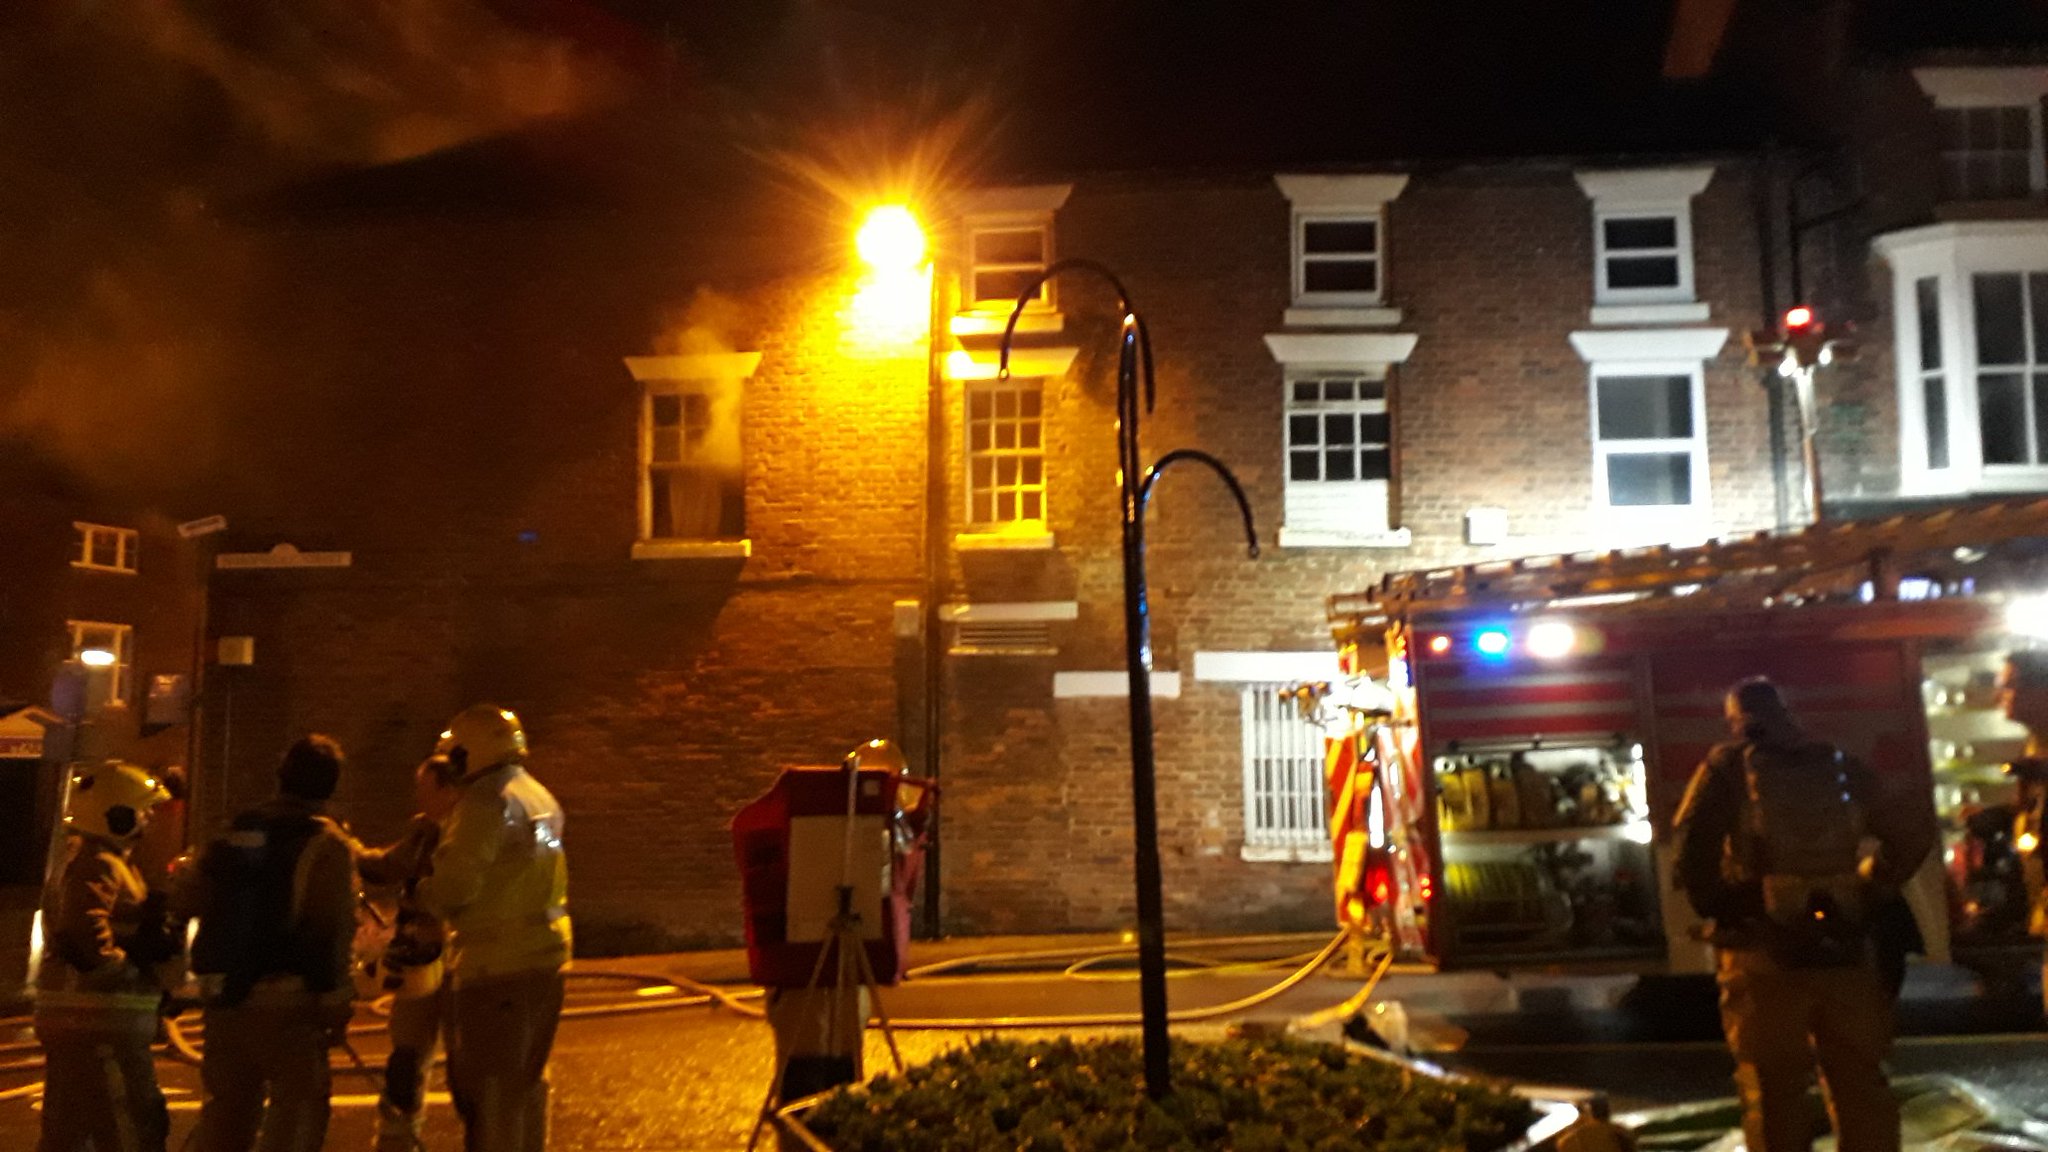 Firefighters at the scene of the fire in Market Drayton. Photo: @SFRS_NGriffiths